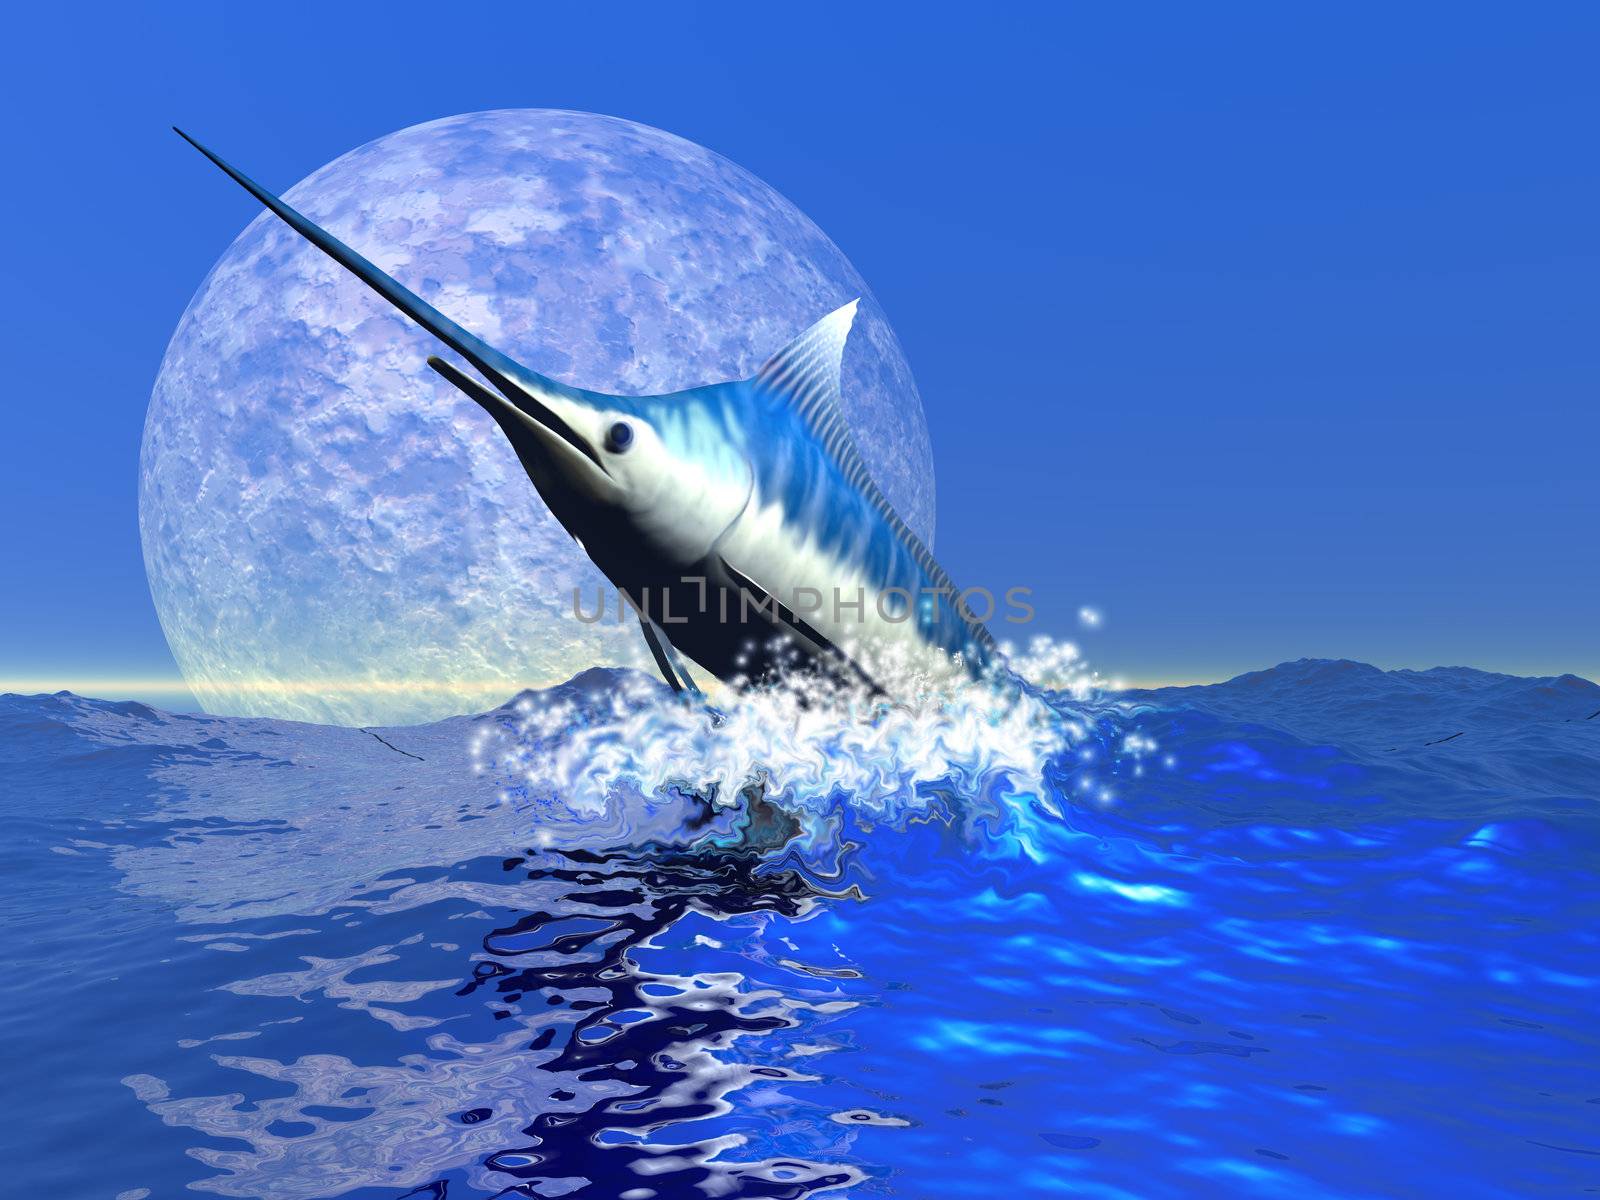 A blue marlin bursts from the ocean in a great splash.